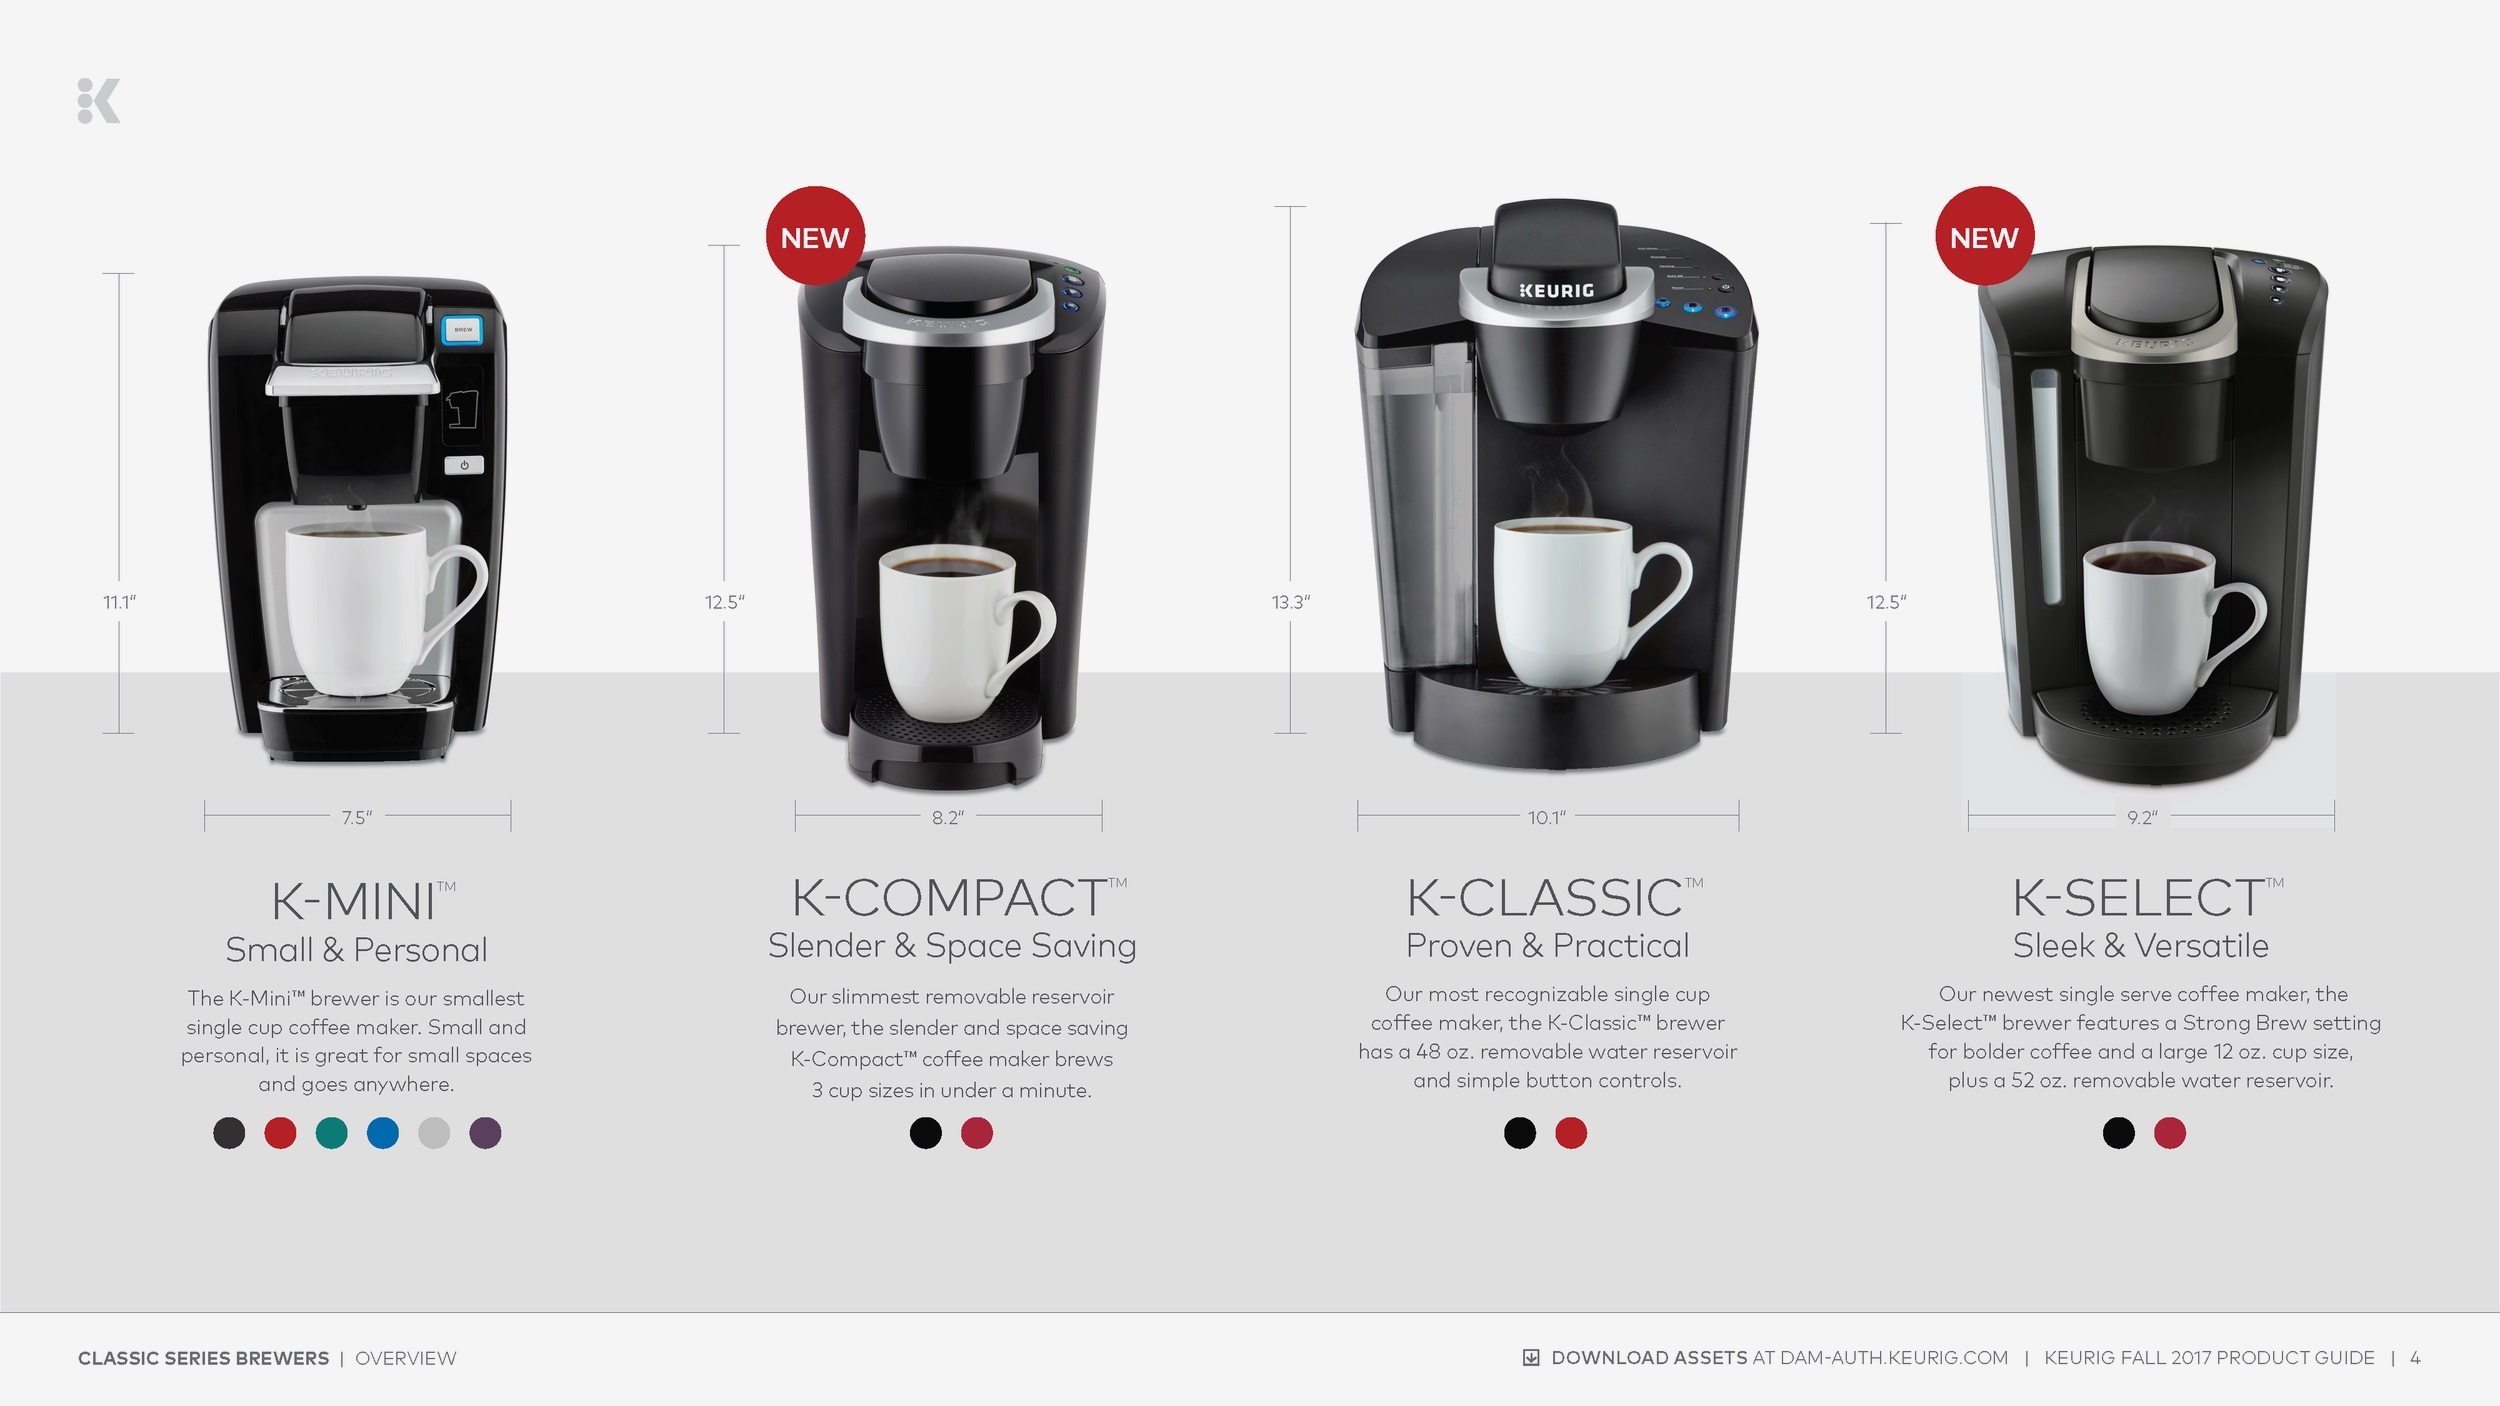 keurig_product_guide_F17_R8_Page_04.png